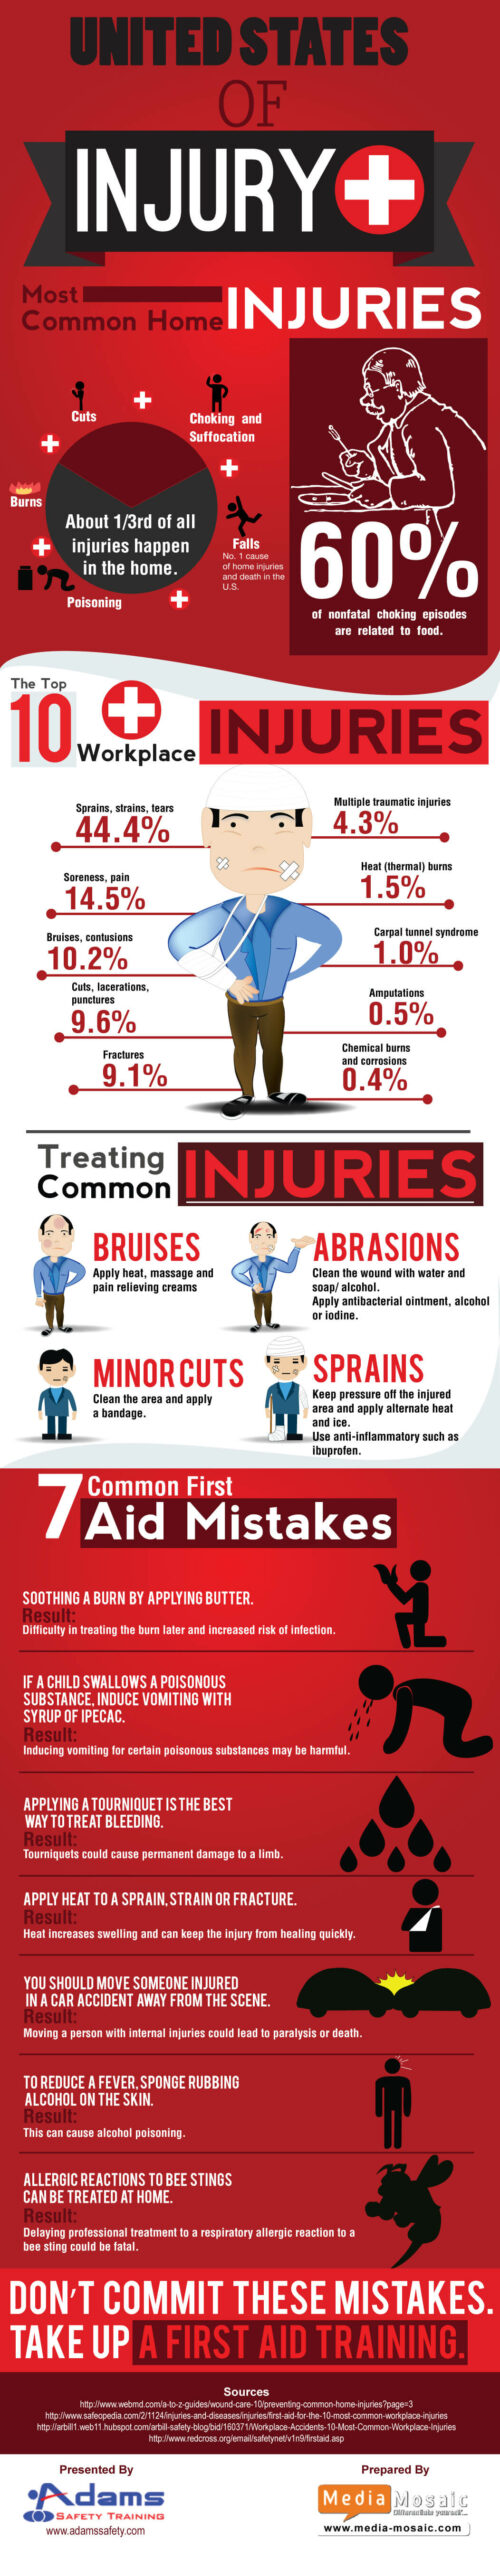 Injuries in United States Infographic